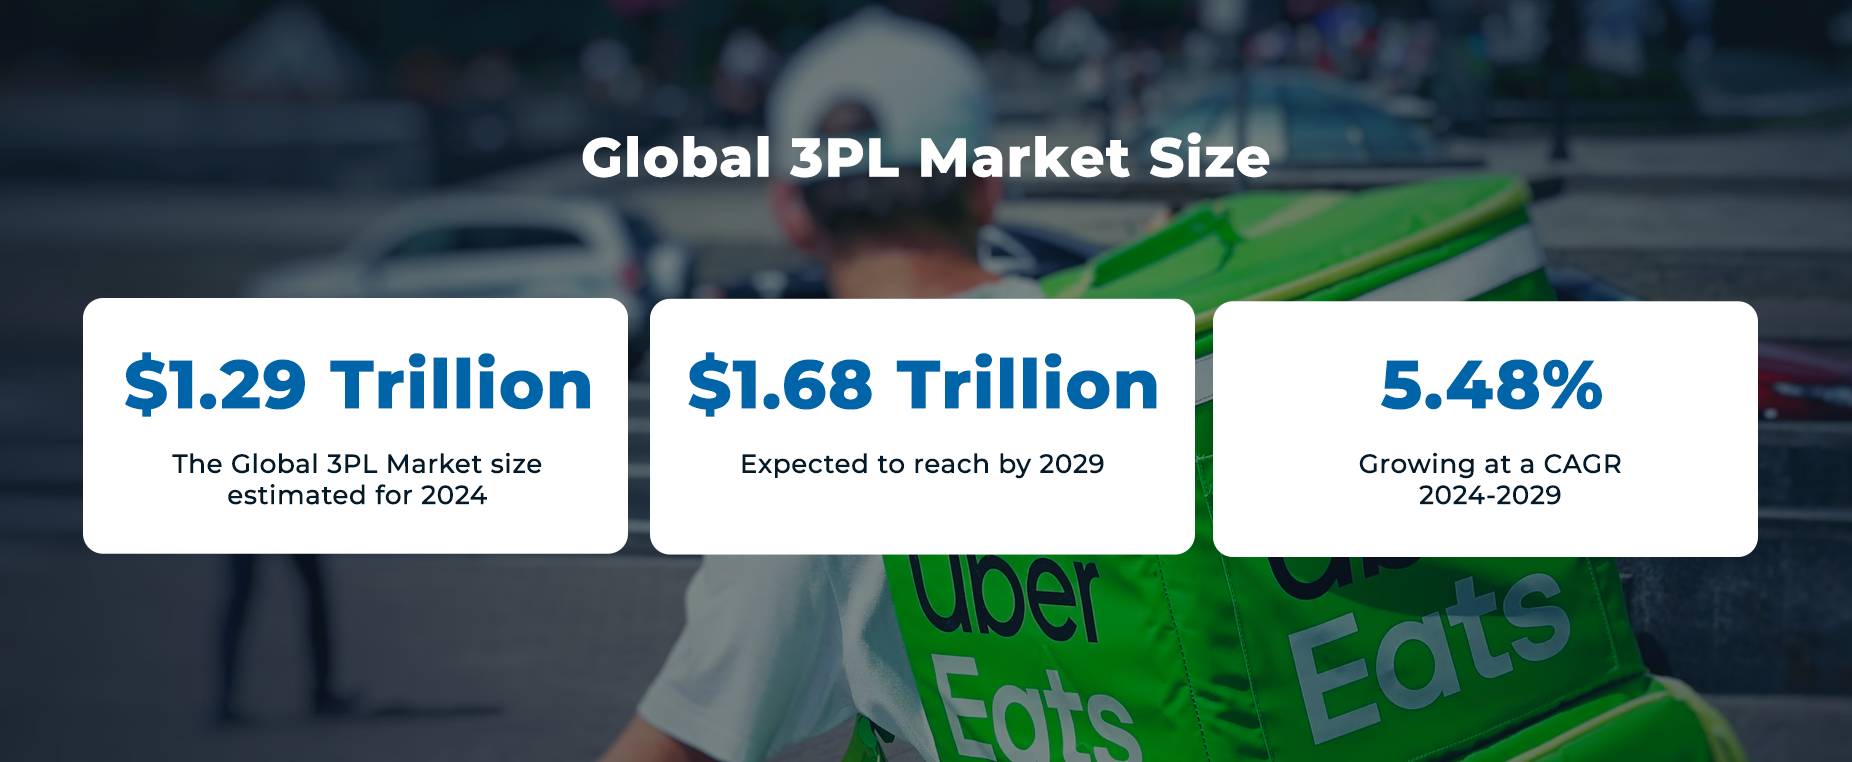 Global 3PL Market Size and Stats